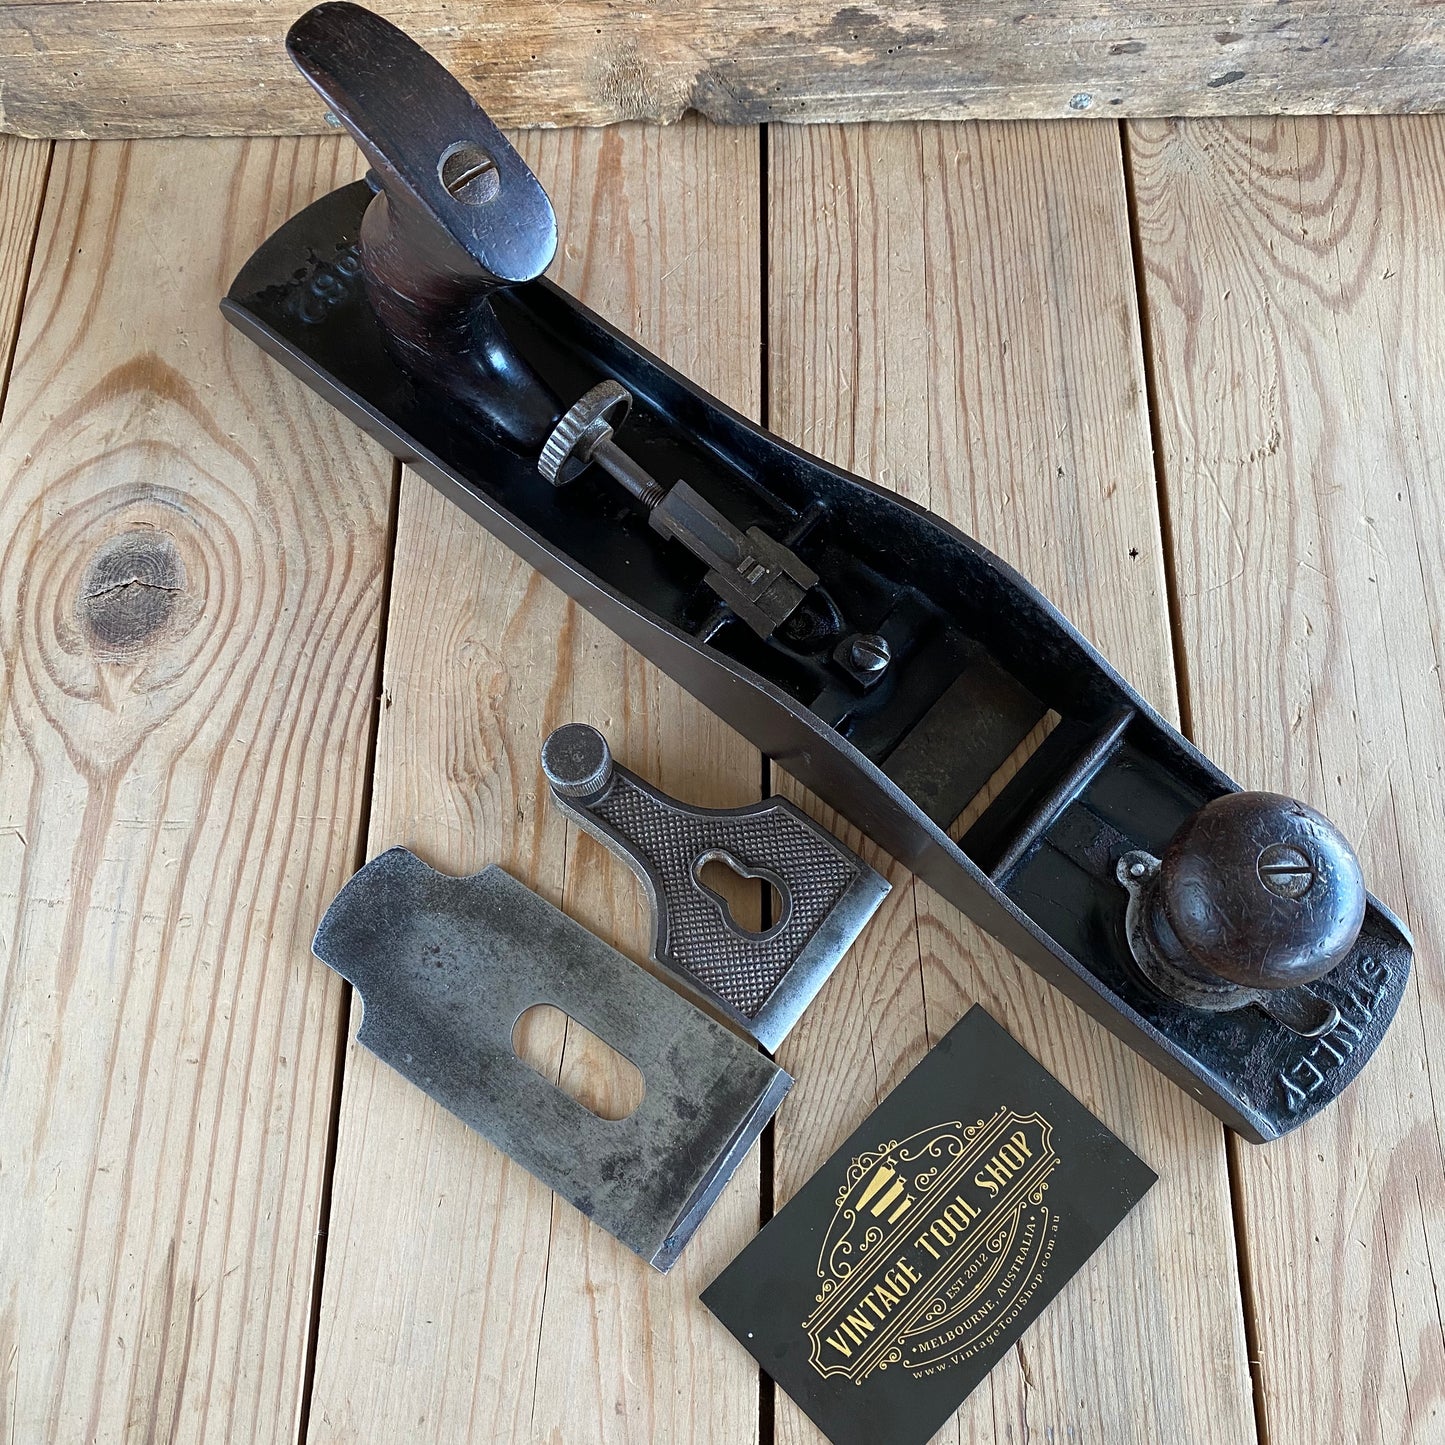 SOLD Antique STANLEY USA No:62 Low Angle JACK Plane T6919